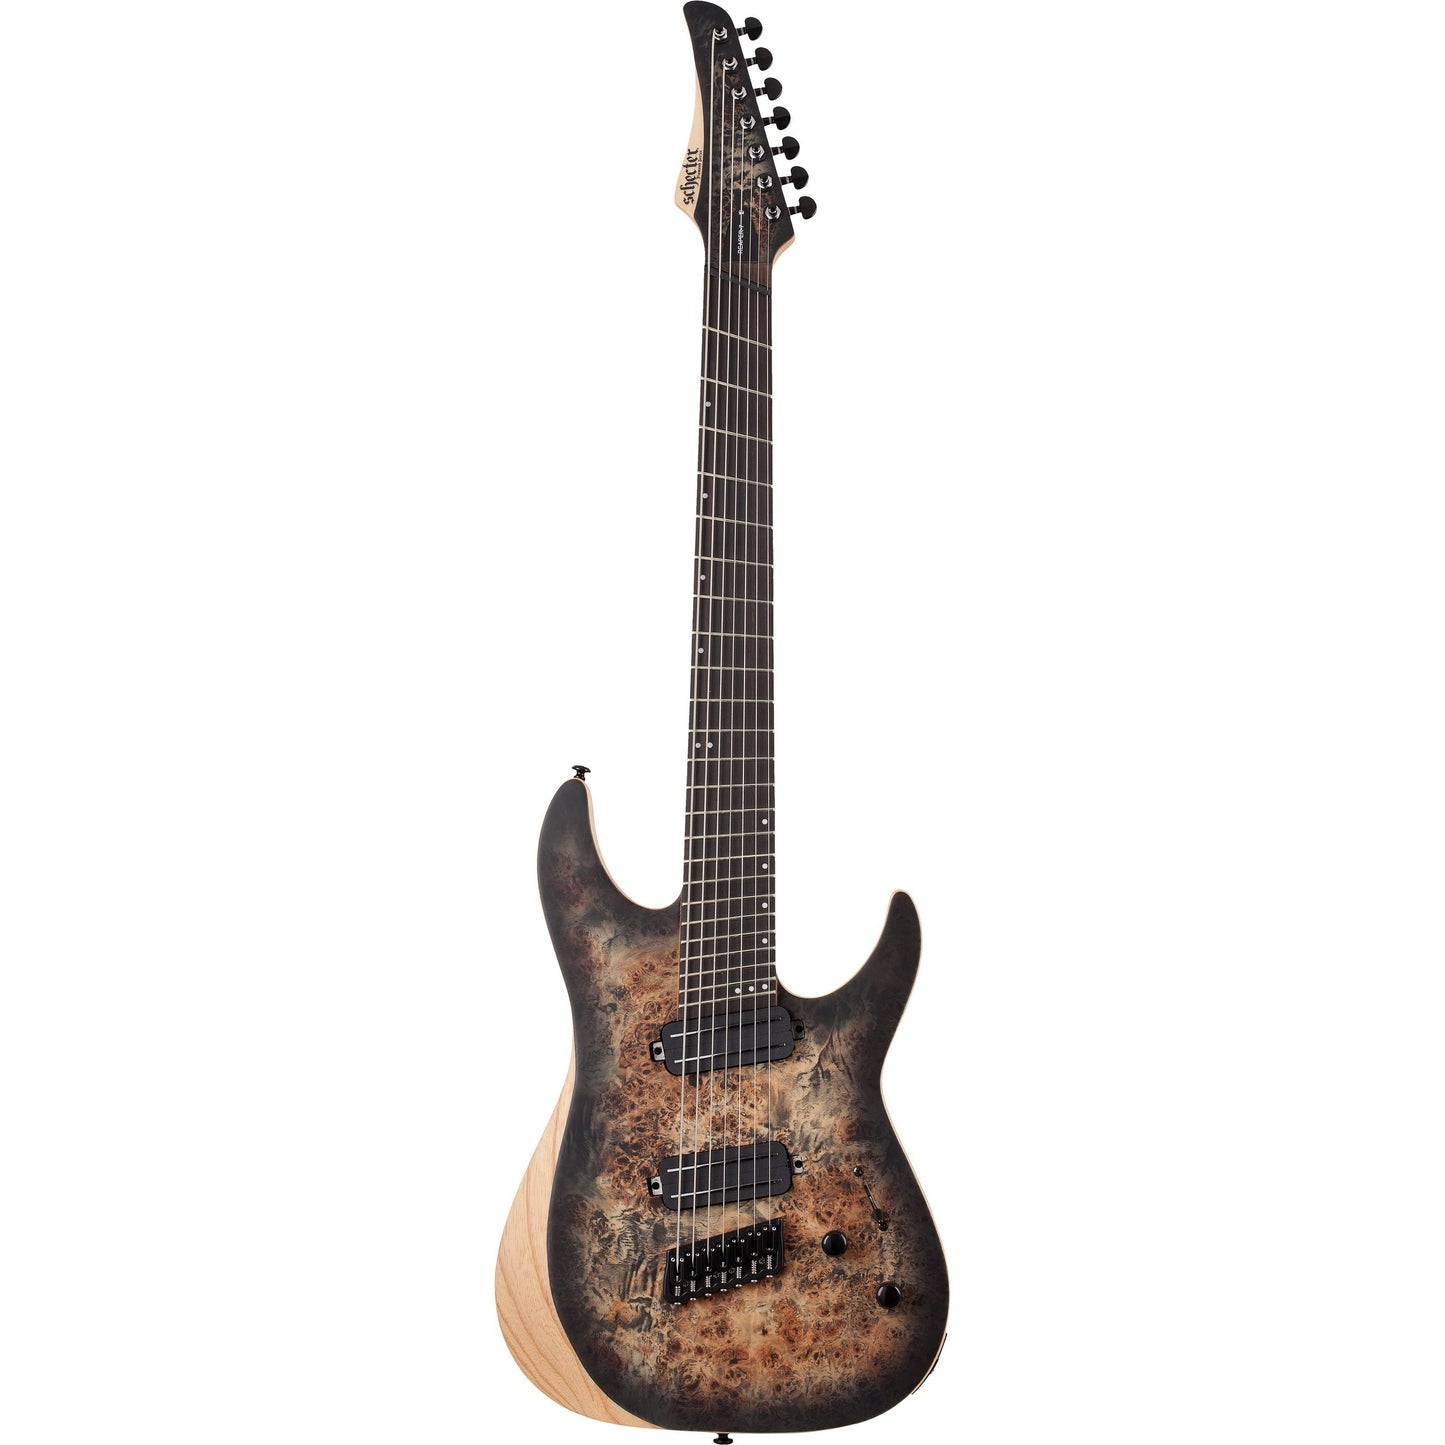 Schecter Reaper 7MS Electric Guitar, 7-String, Charcoal Burst